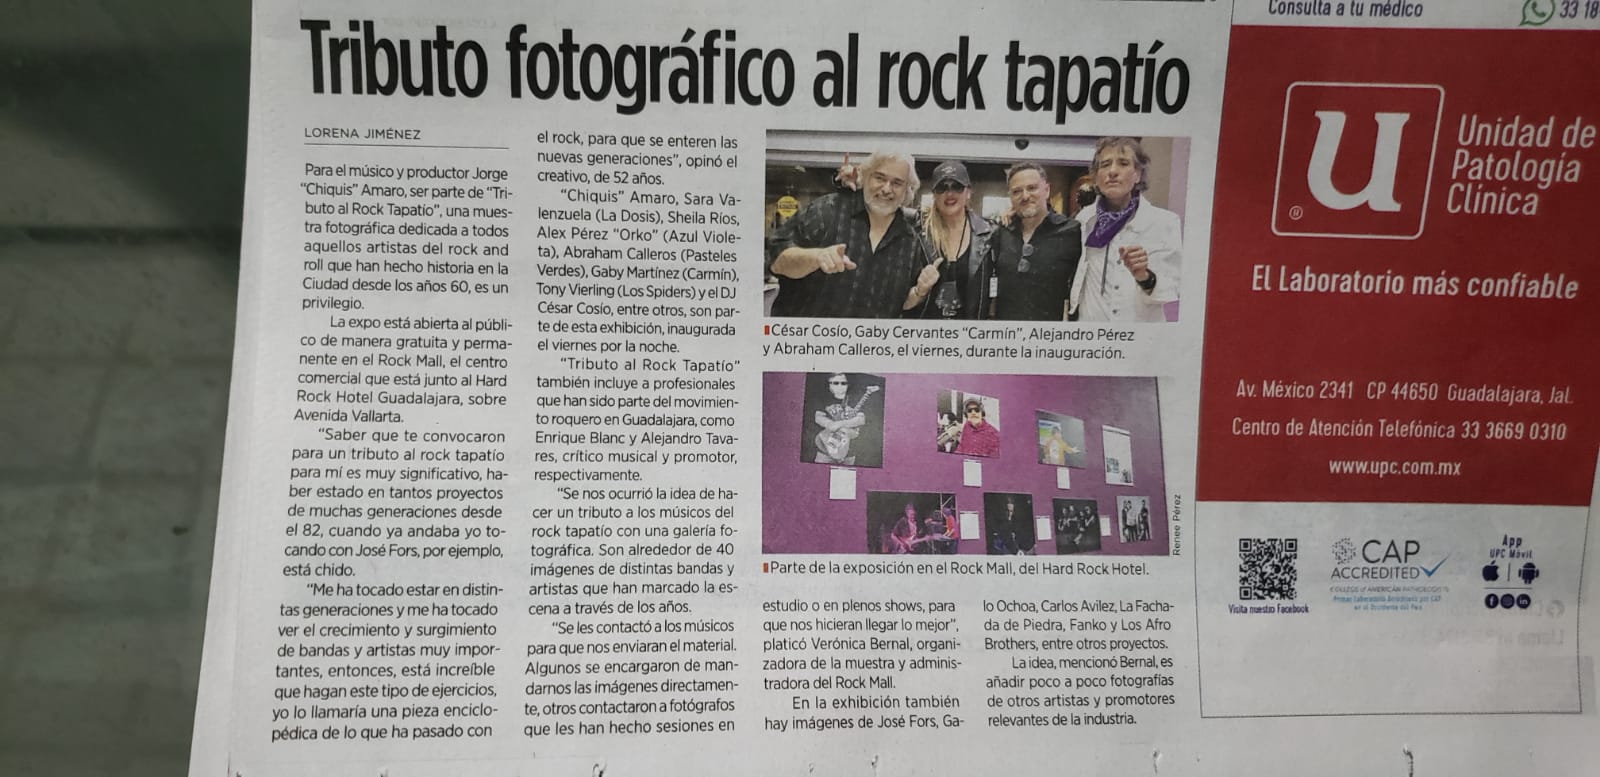 Photographic tribute to rock